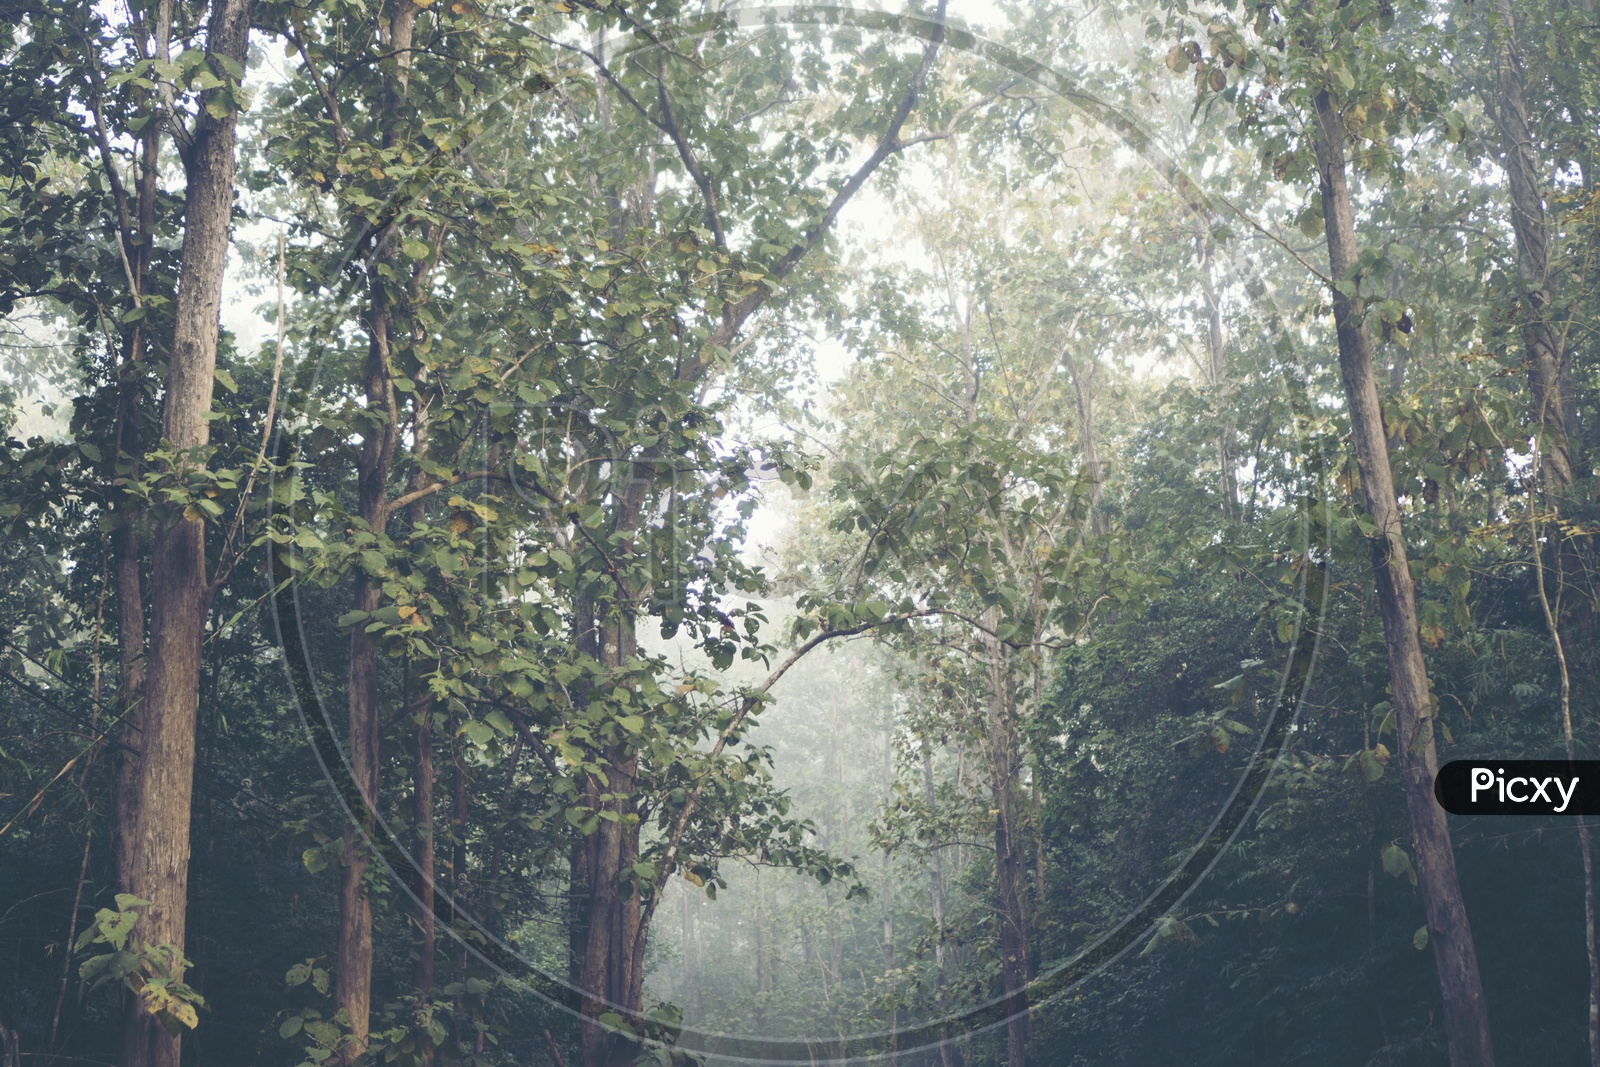 Trees & foggy morning in the tropical forest